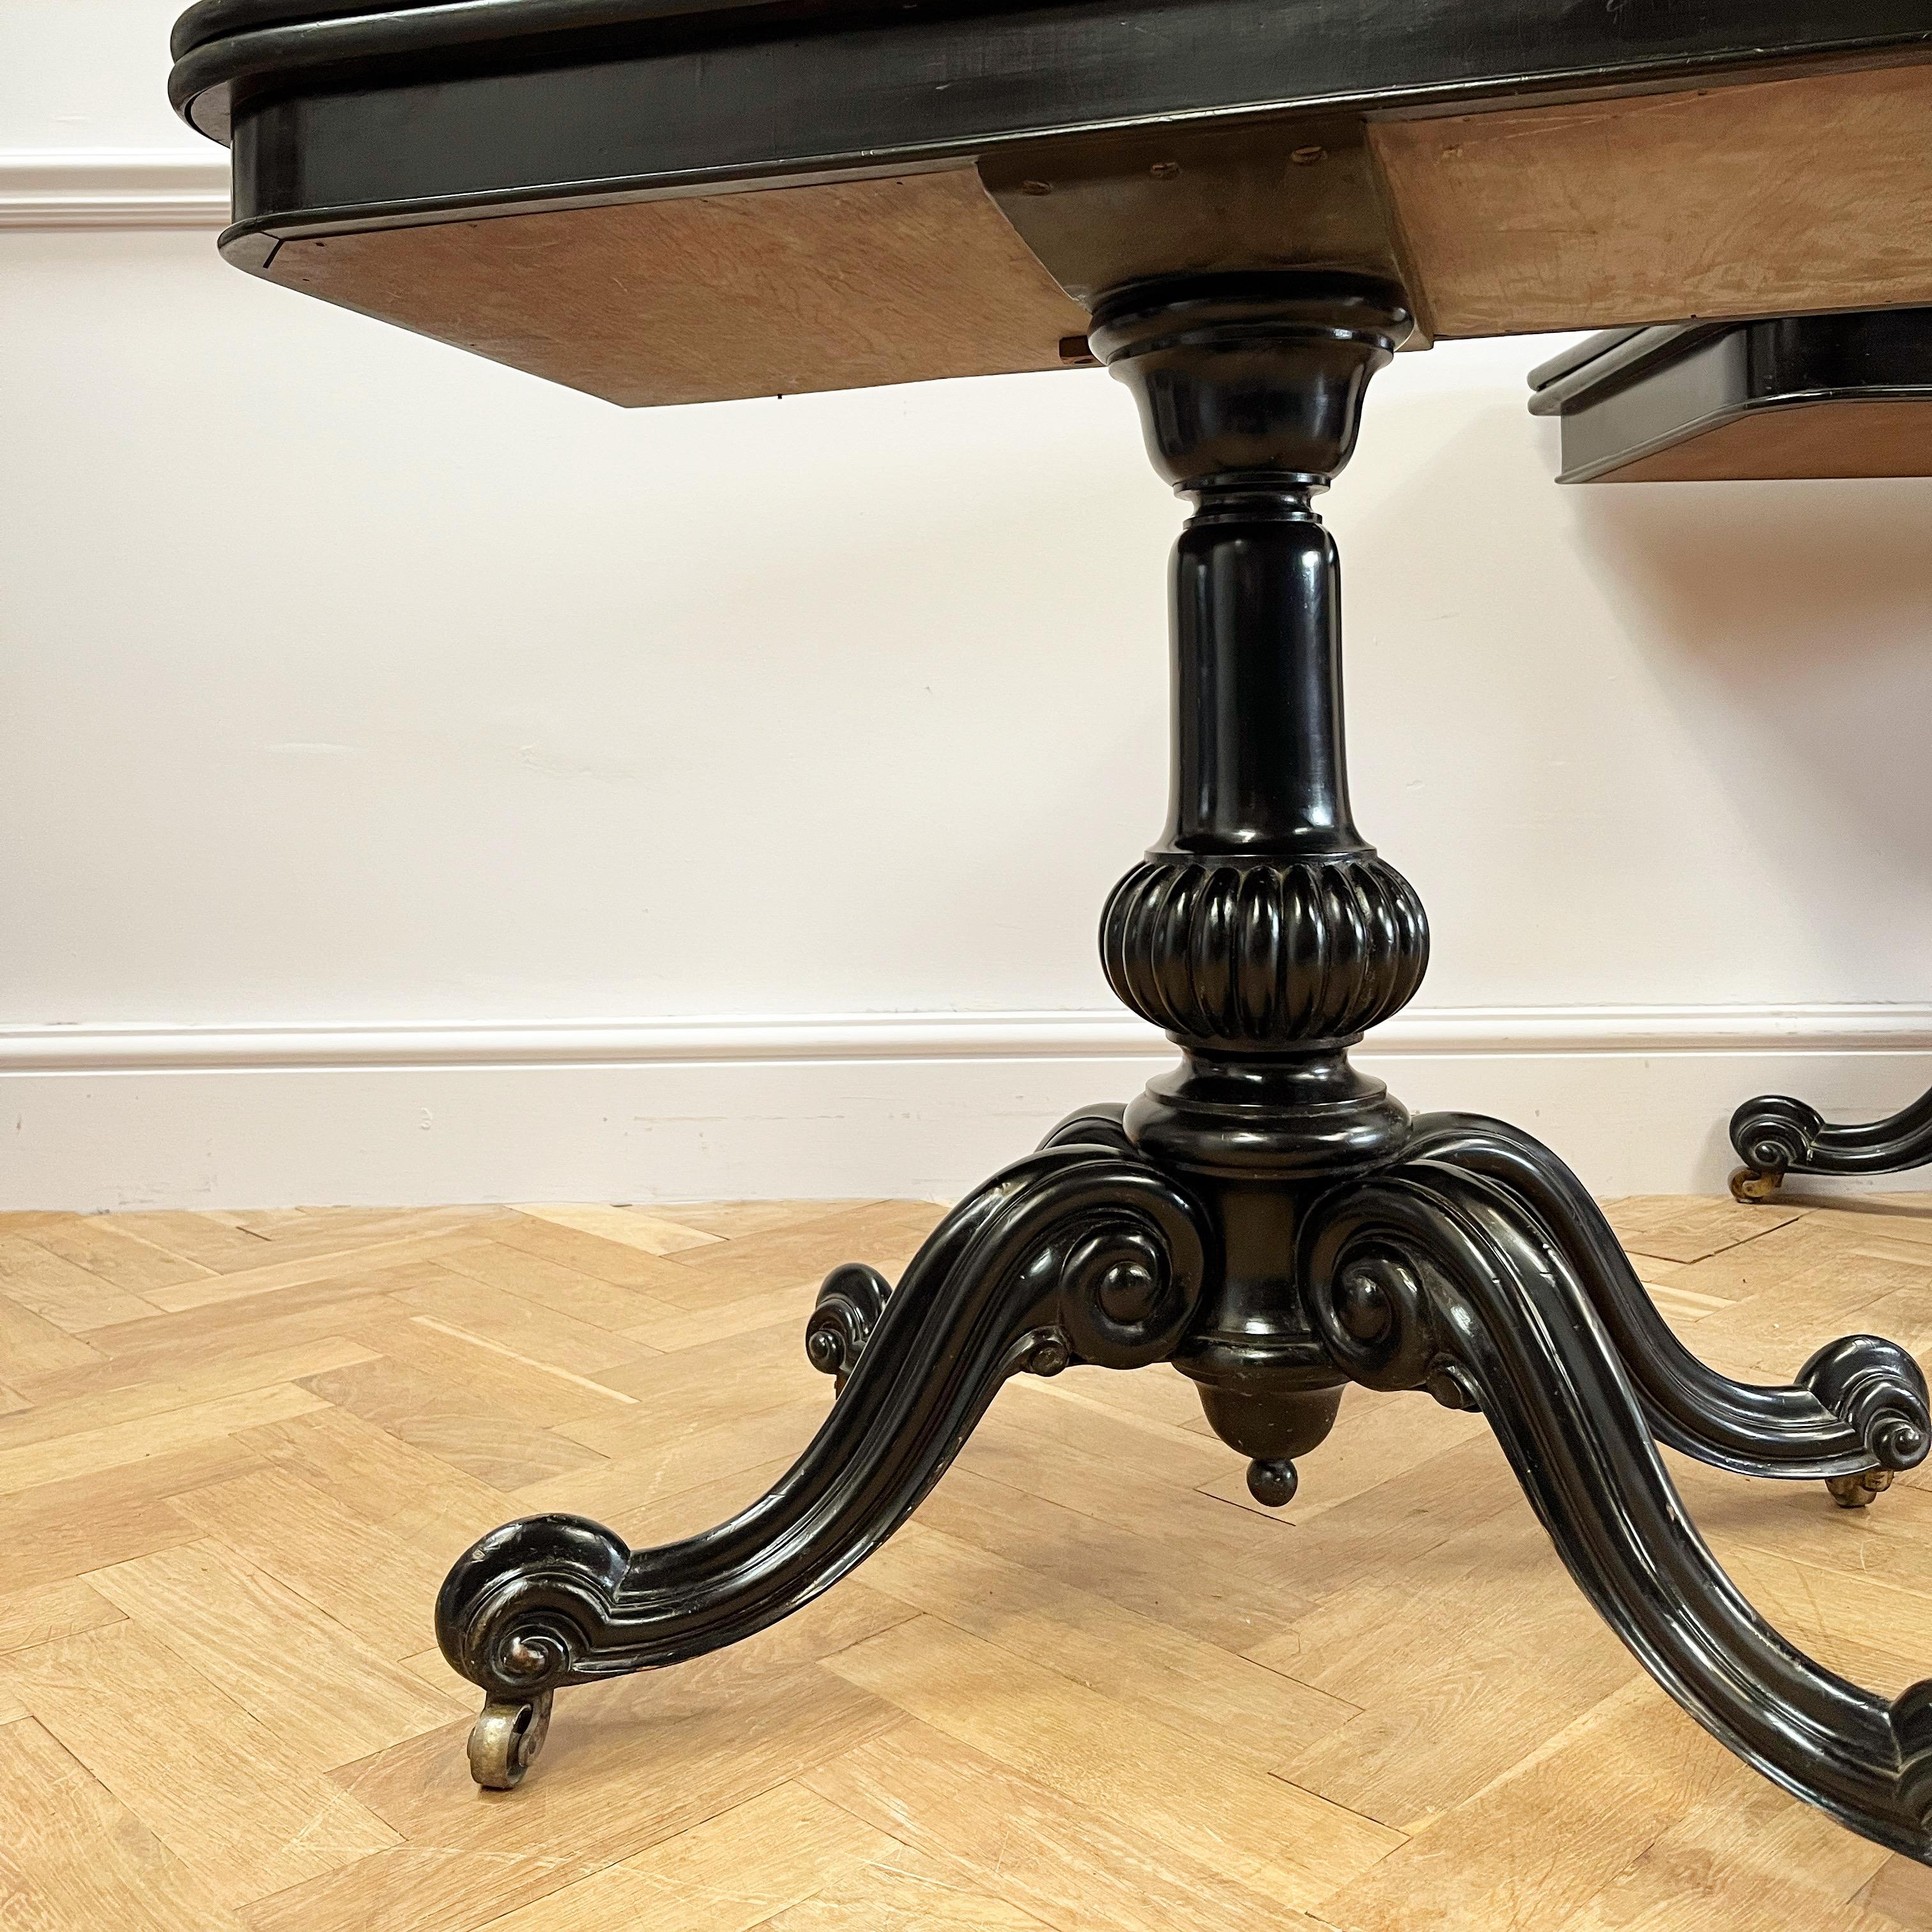 A striking pair of William IV ebonised card tables, the tops highly polished supported by a fluted baluster column above four carved legs terminating in brass castors. 

English, Mid-19th Century.